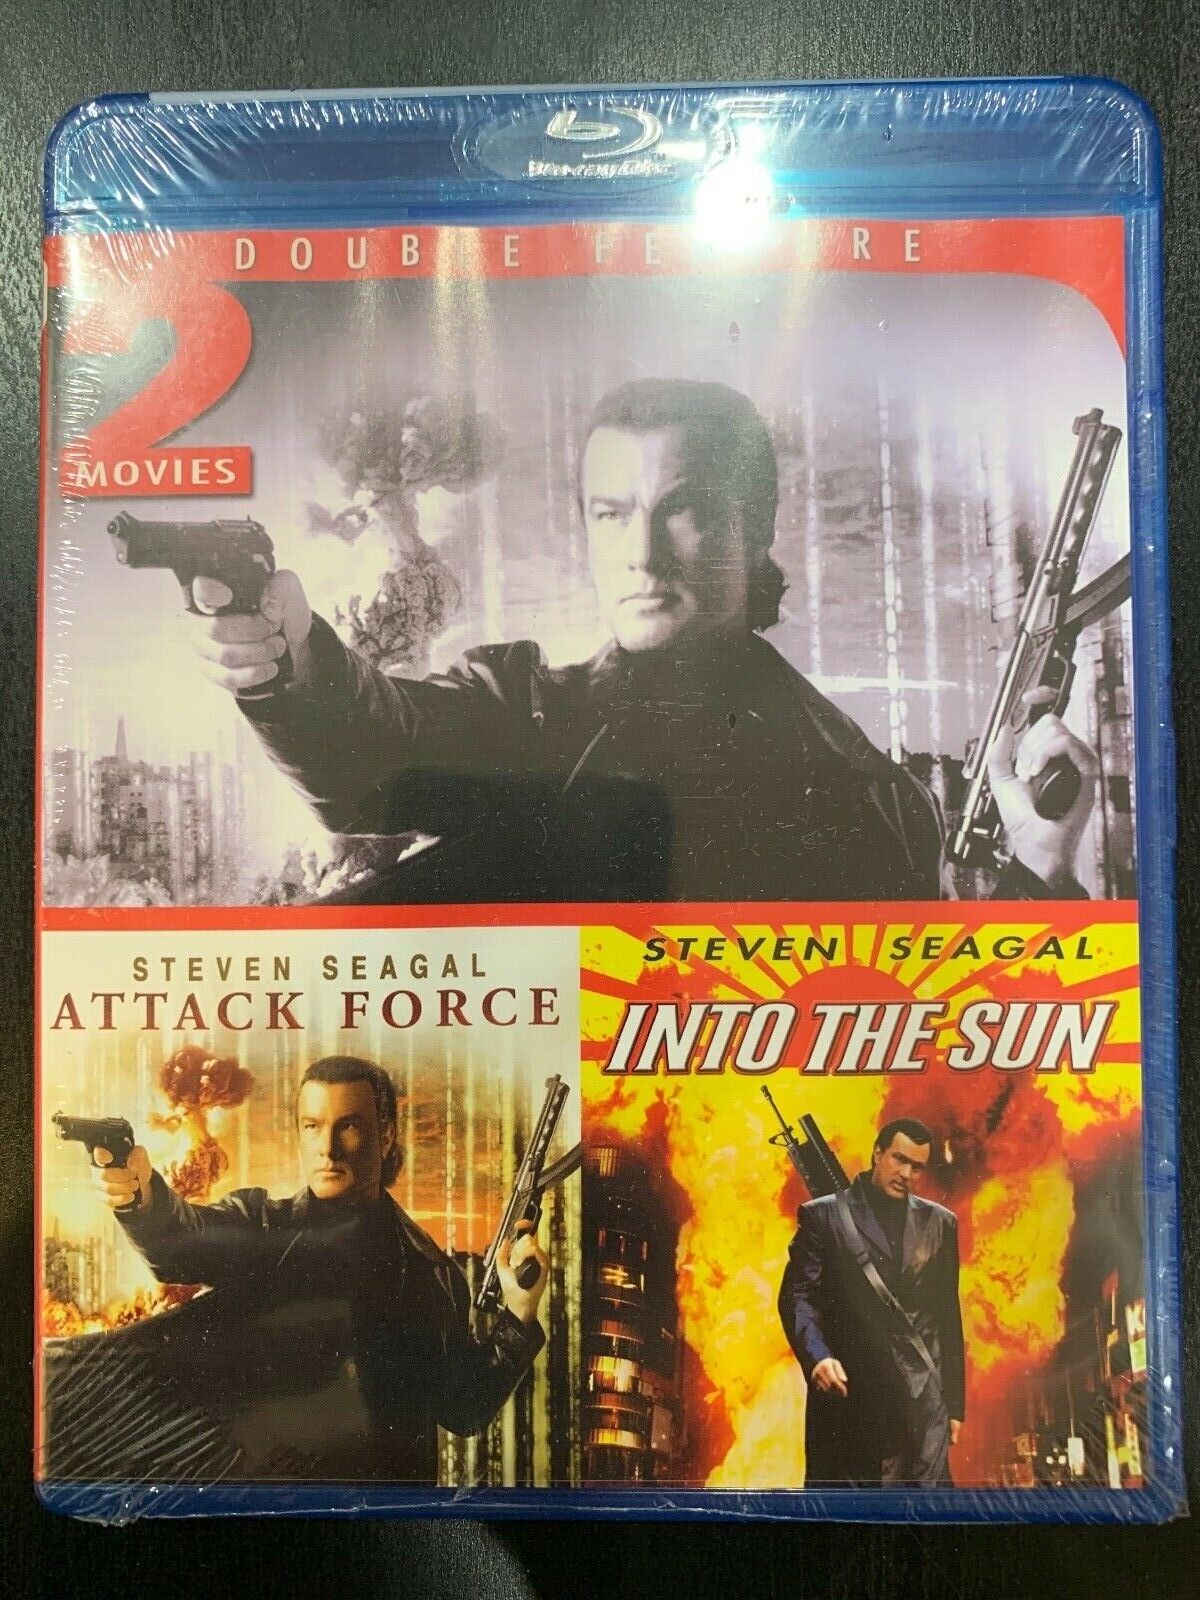 * Action Blu-rays * New & Like New * Your Choice $4-6 each - $3 Flat Shipping *